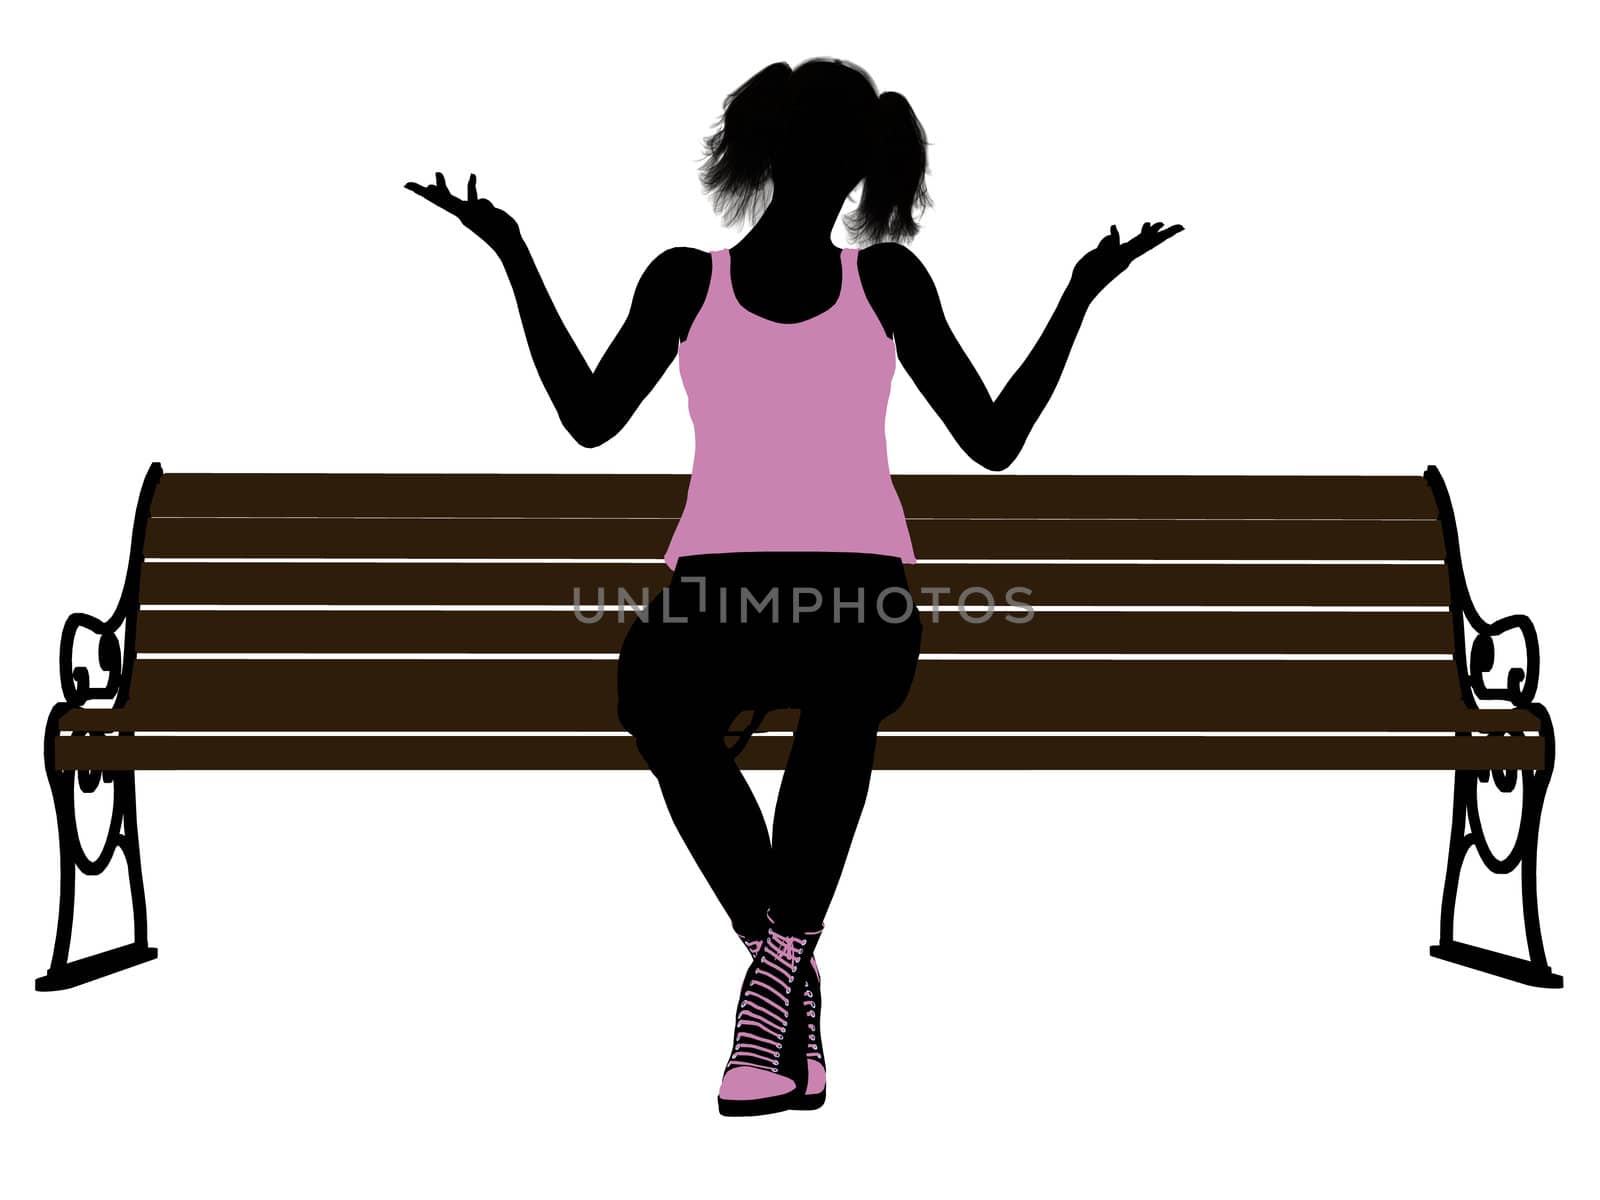 Female Athlete Sitting On A Bench Illustration Silhouette by kathygold